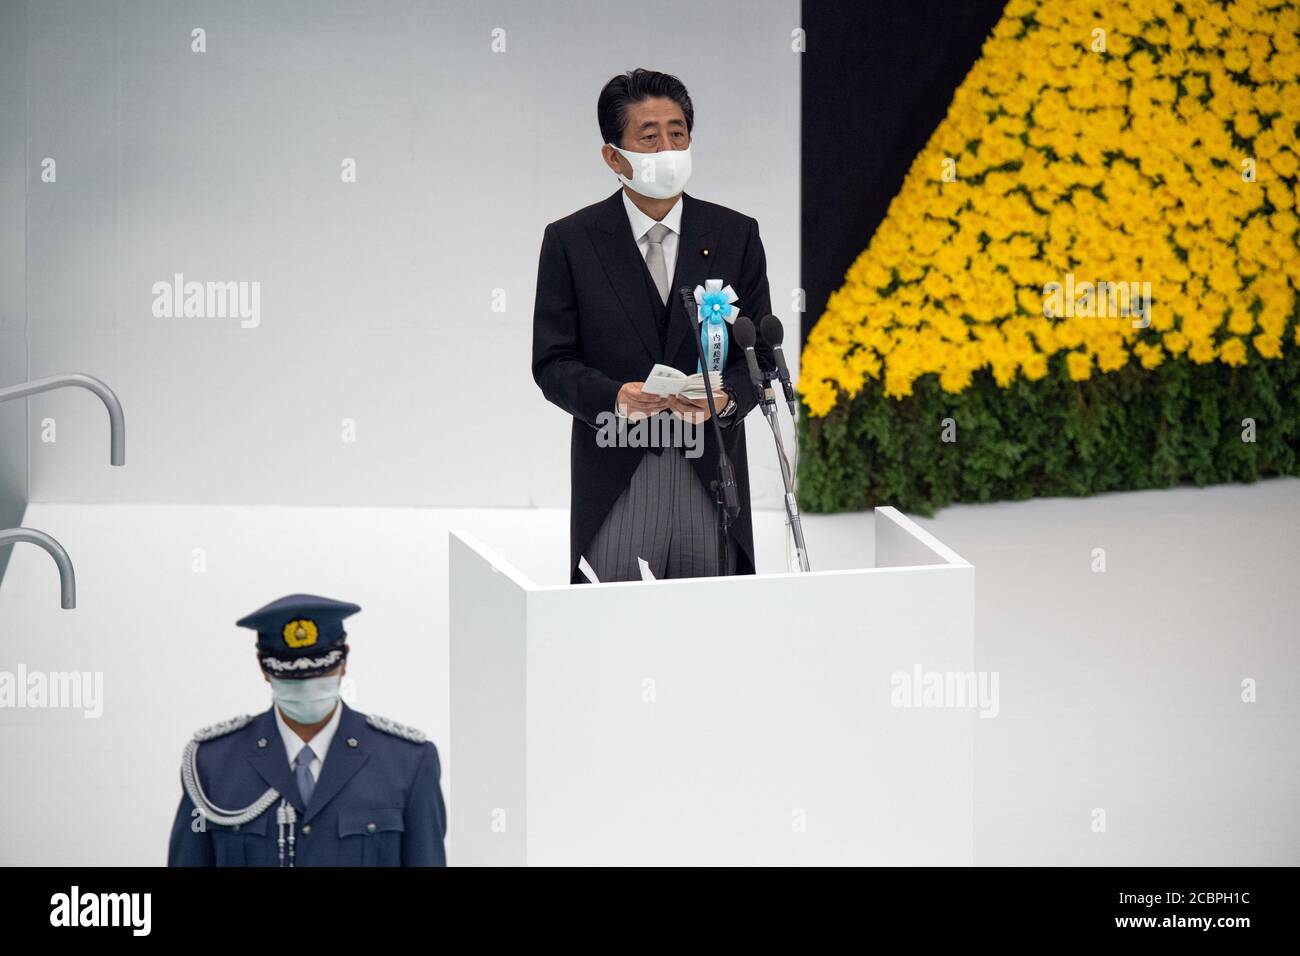 Tokyo, Japan. 15th Aug, 2020. TOKYO, JAPAN - AUGUST 15: Japan's Japan's Prime Minister, Shinzo Abe, makes a speech during a memorial service marking the 75th anniversary of Japan's surrender in World War II at the Nippon Budokan hall on August 15, 2020 in Tokyo, Japan. 75 years ago today and following the atomic bomb attacks on Hiroshima and Nagasaki, former emperor Hirohito formally announced Japan's surrender to allied forces, bringing the hostilities of World War II to an end. Credit: POOL/ZUMA Wire/Alamy Live News Stock Photo